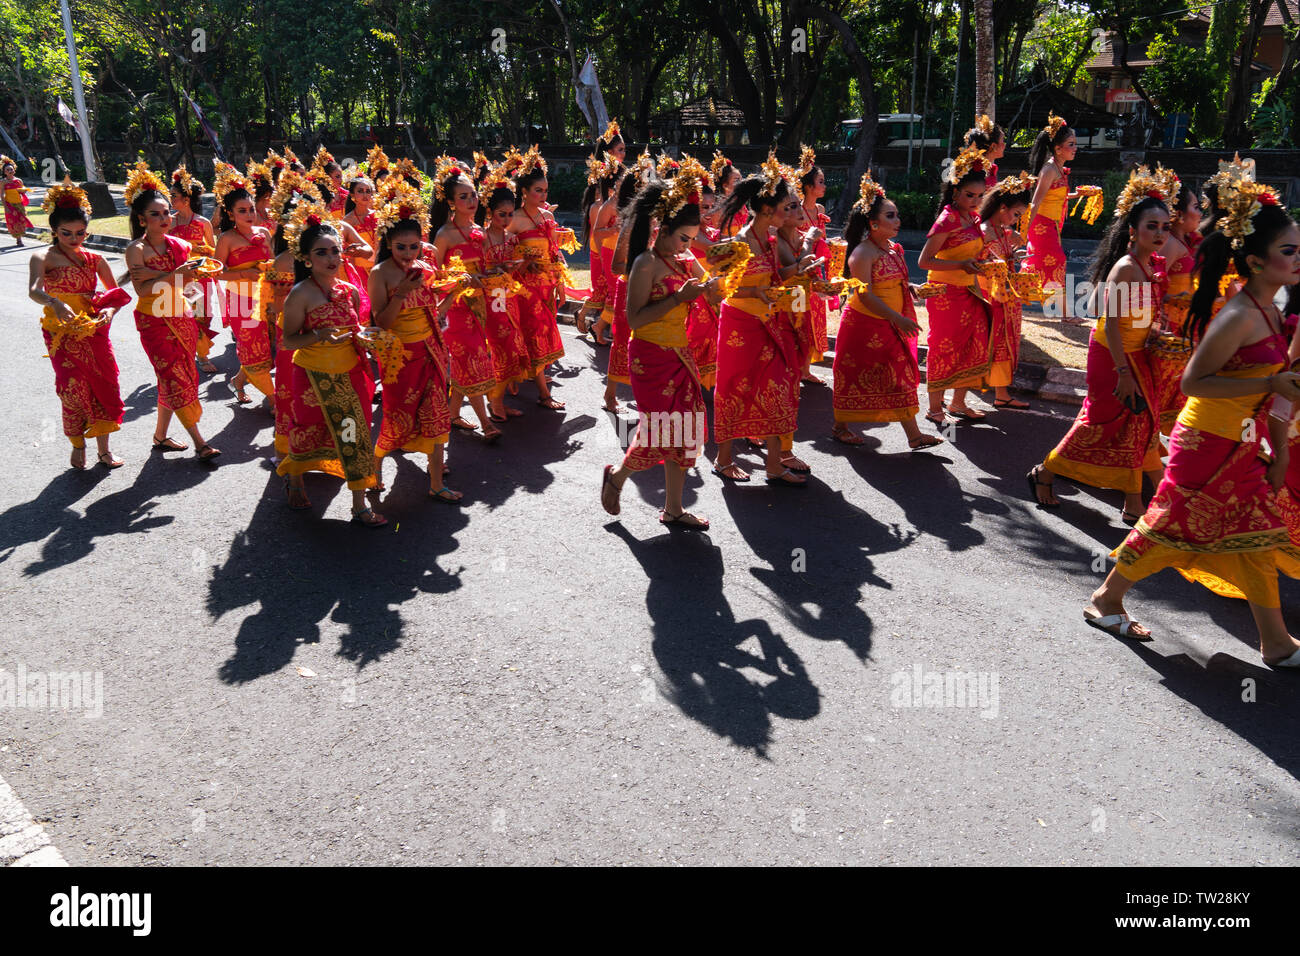 DENPASAR/BALI-JUNE 15 2019: Young Balinese women wearing traditional Balinese headdress and traditional sarong at the opening ceremony of the Bali Art Stock Photo